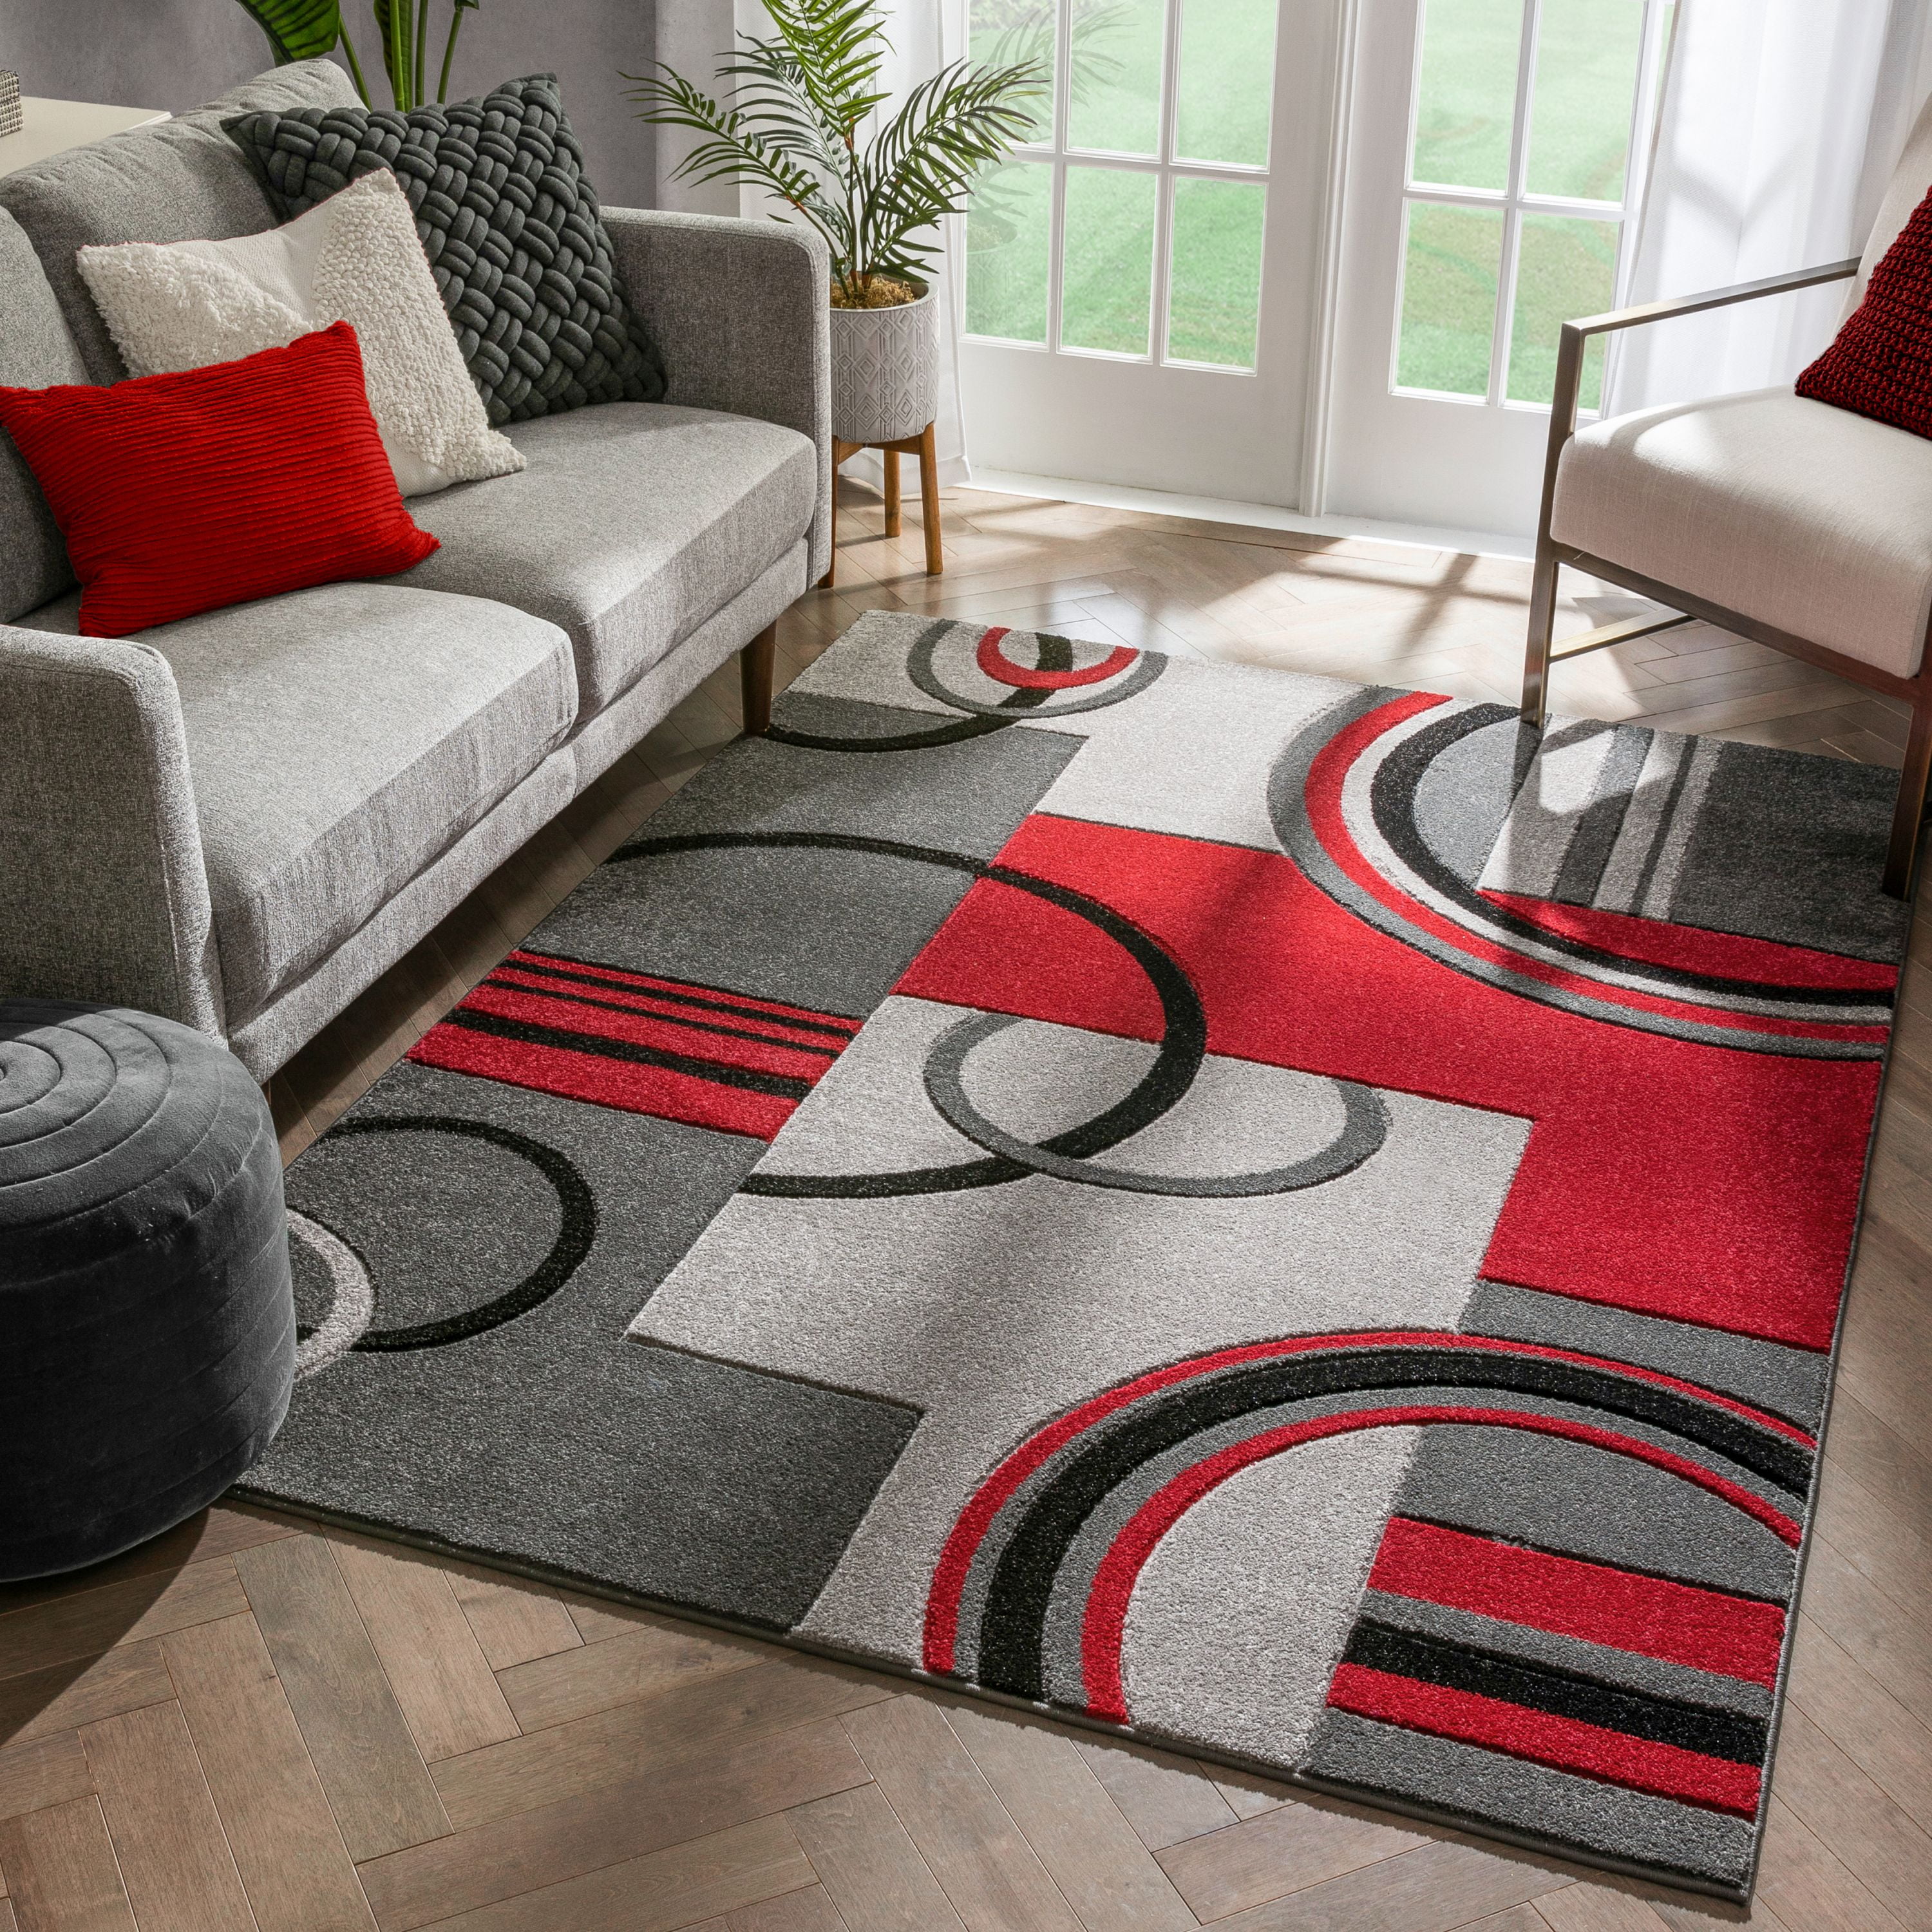 Well Woven Ruby Galaxy Waves Modern, Red And Grey Area Rugs